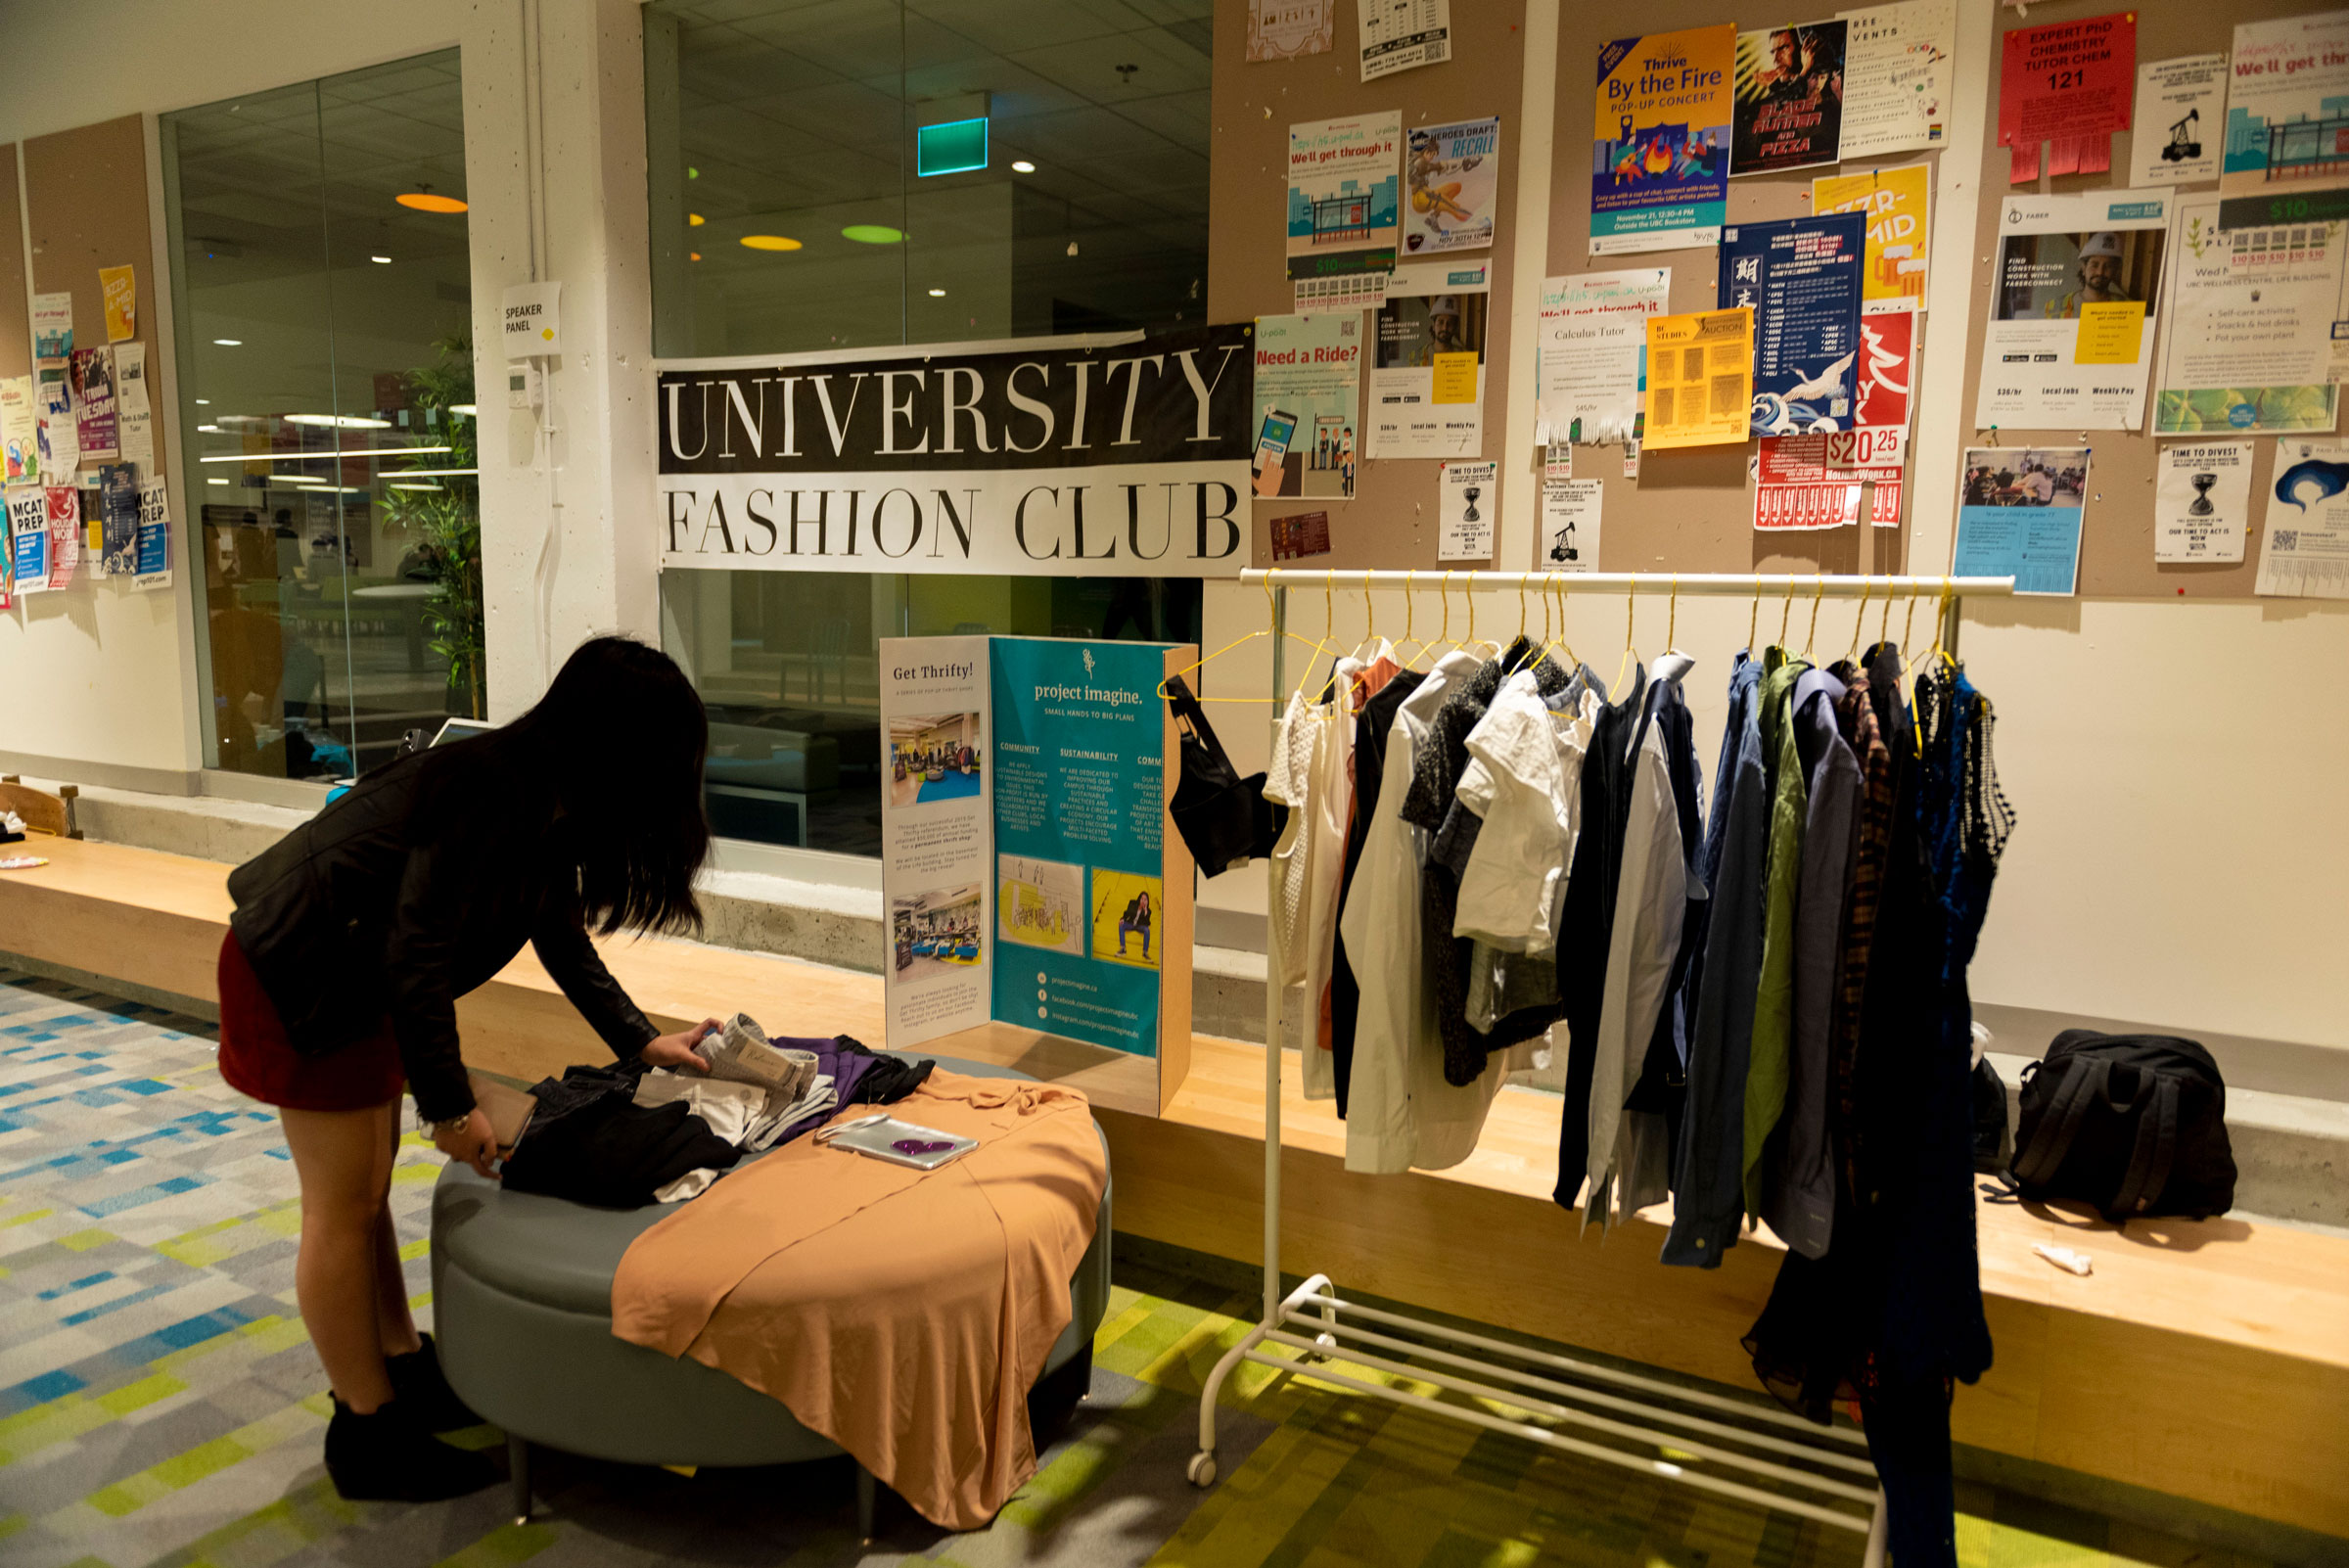 Fashion club gathering photographed by Annora Zheng